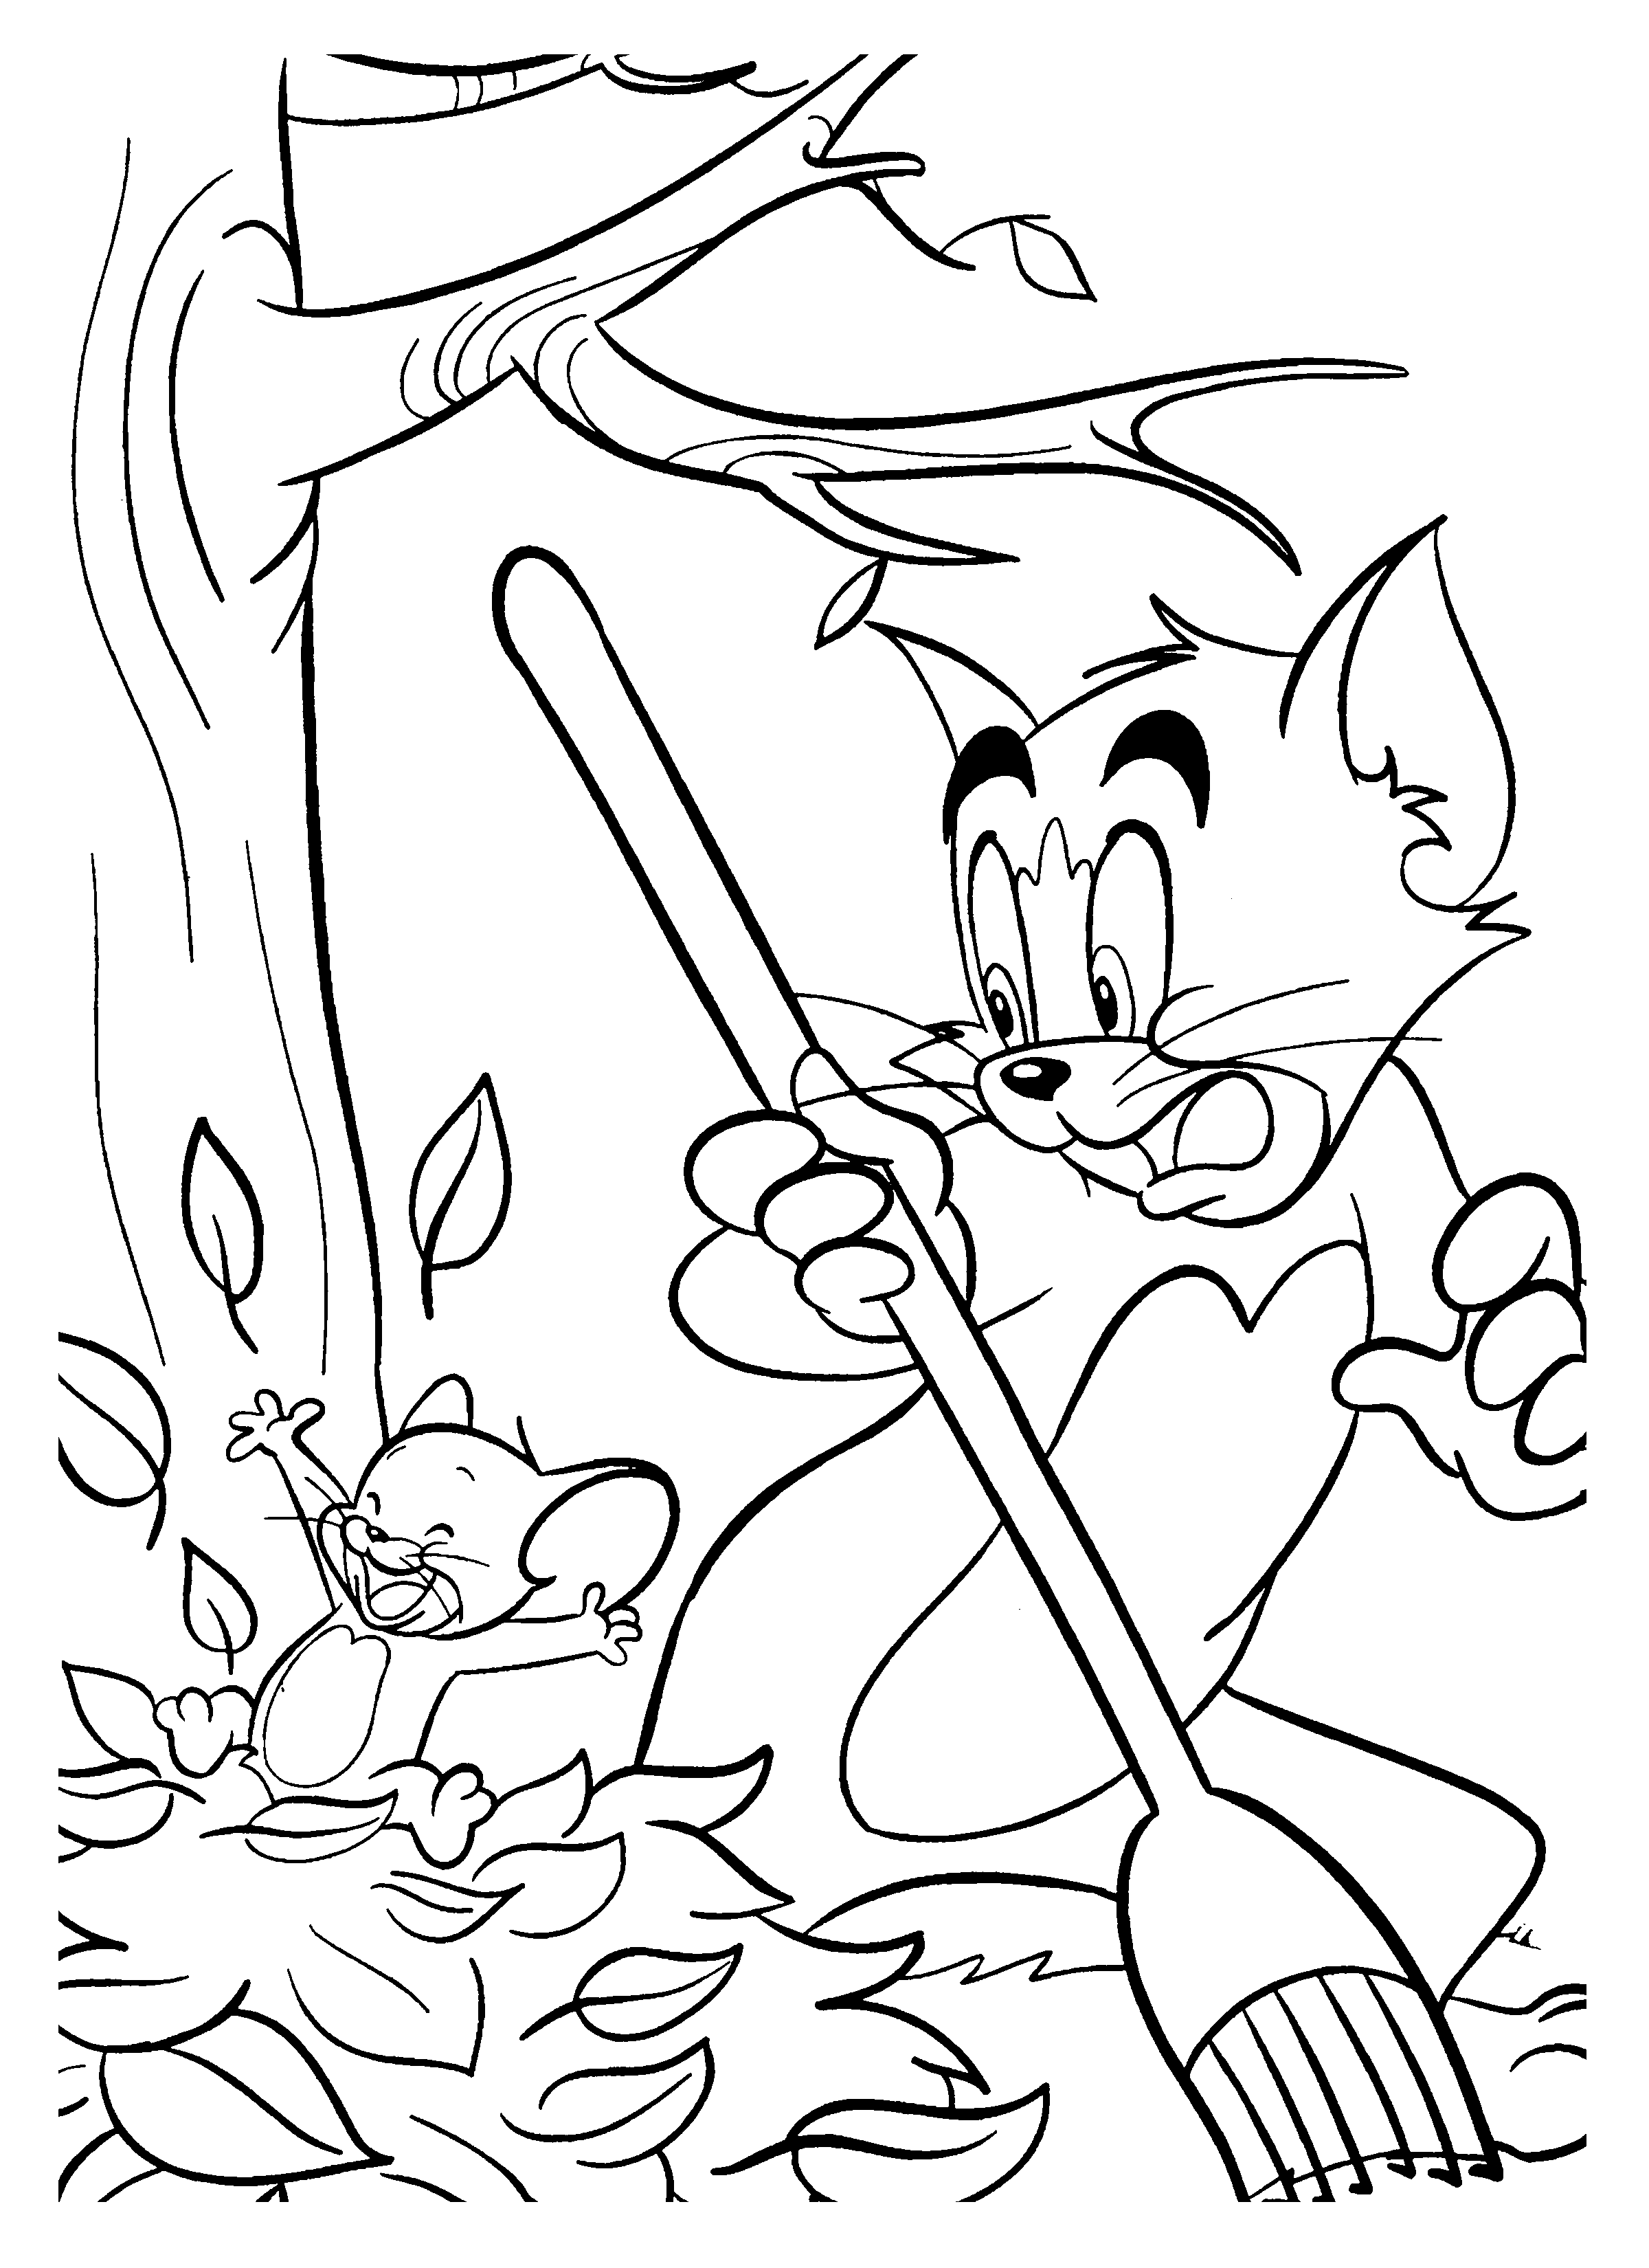 Tom and jerry free to color for children   Tom And Jerry Kids ...